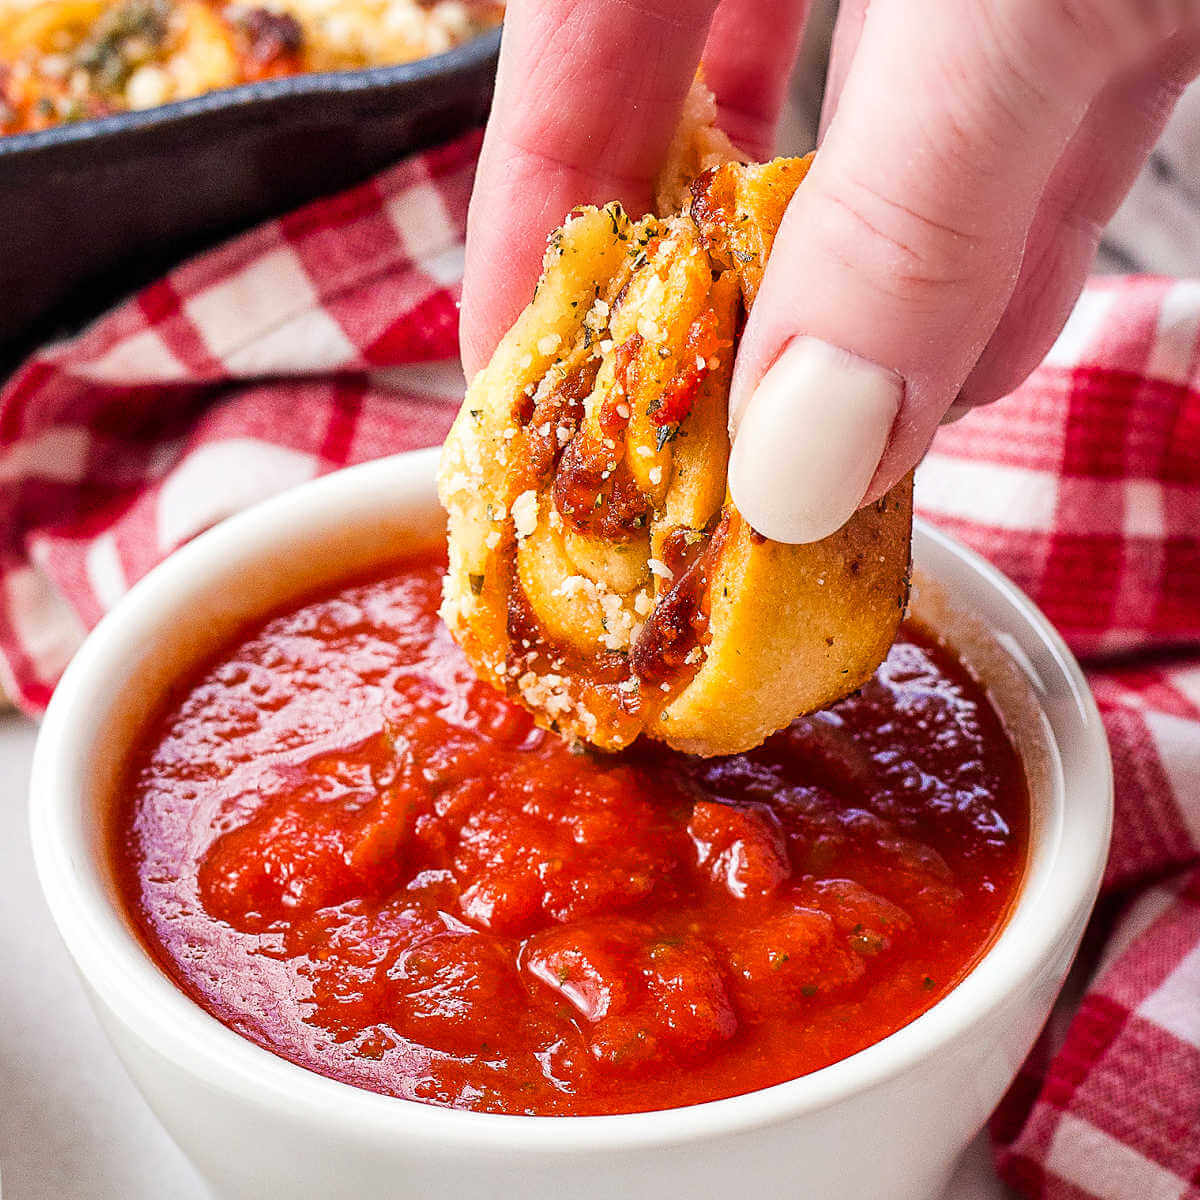 Dipping a pizza rollup into a bowl of marinara sauce on a table.